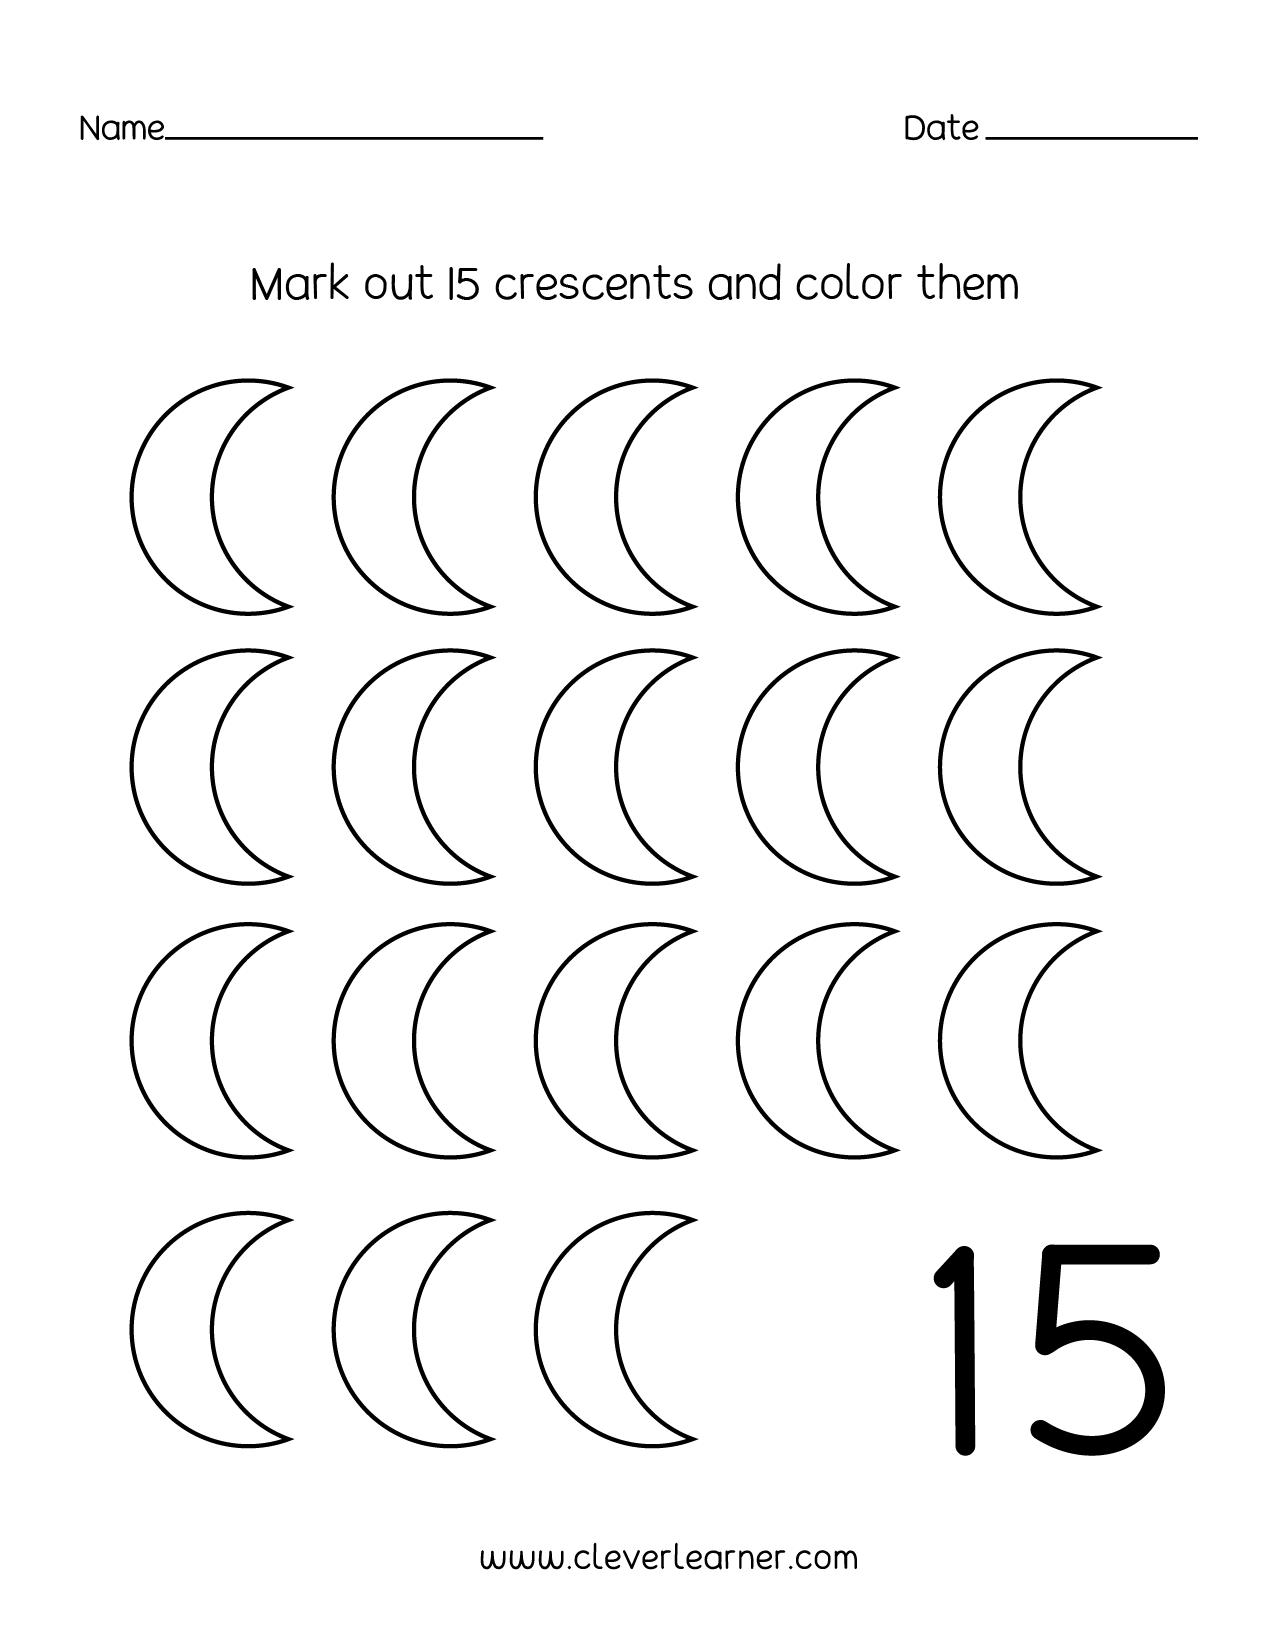 Number 15 Writing Counting And Identification Printable Worksheets For Children